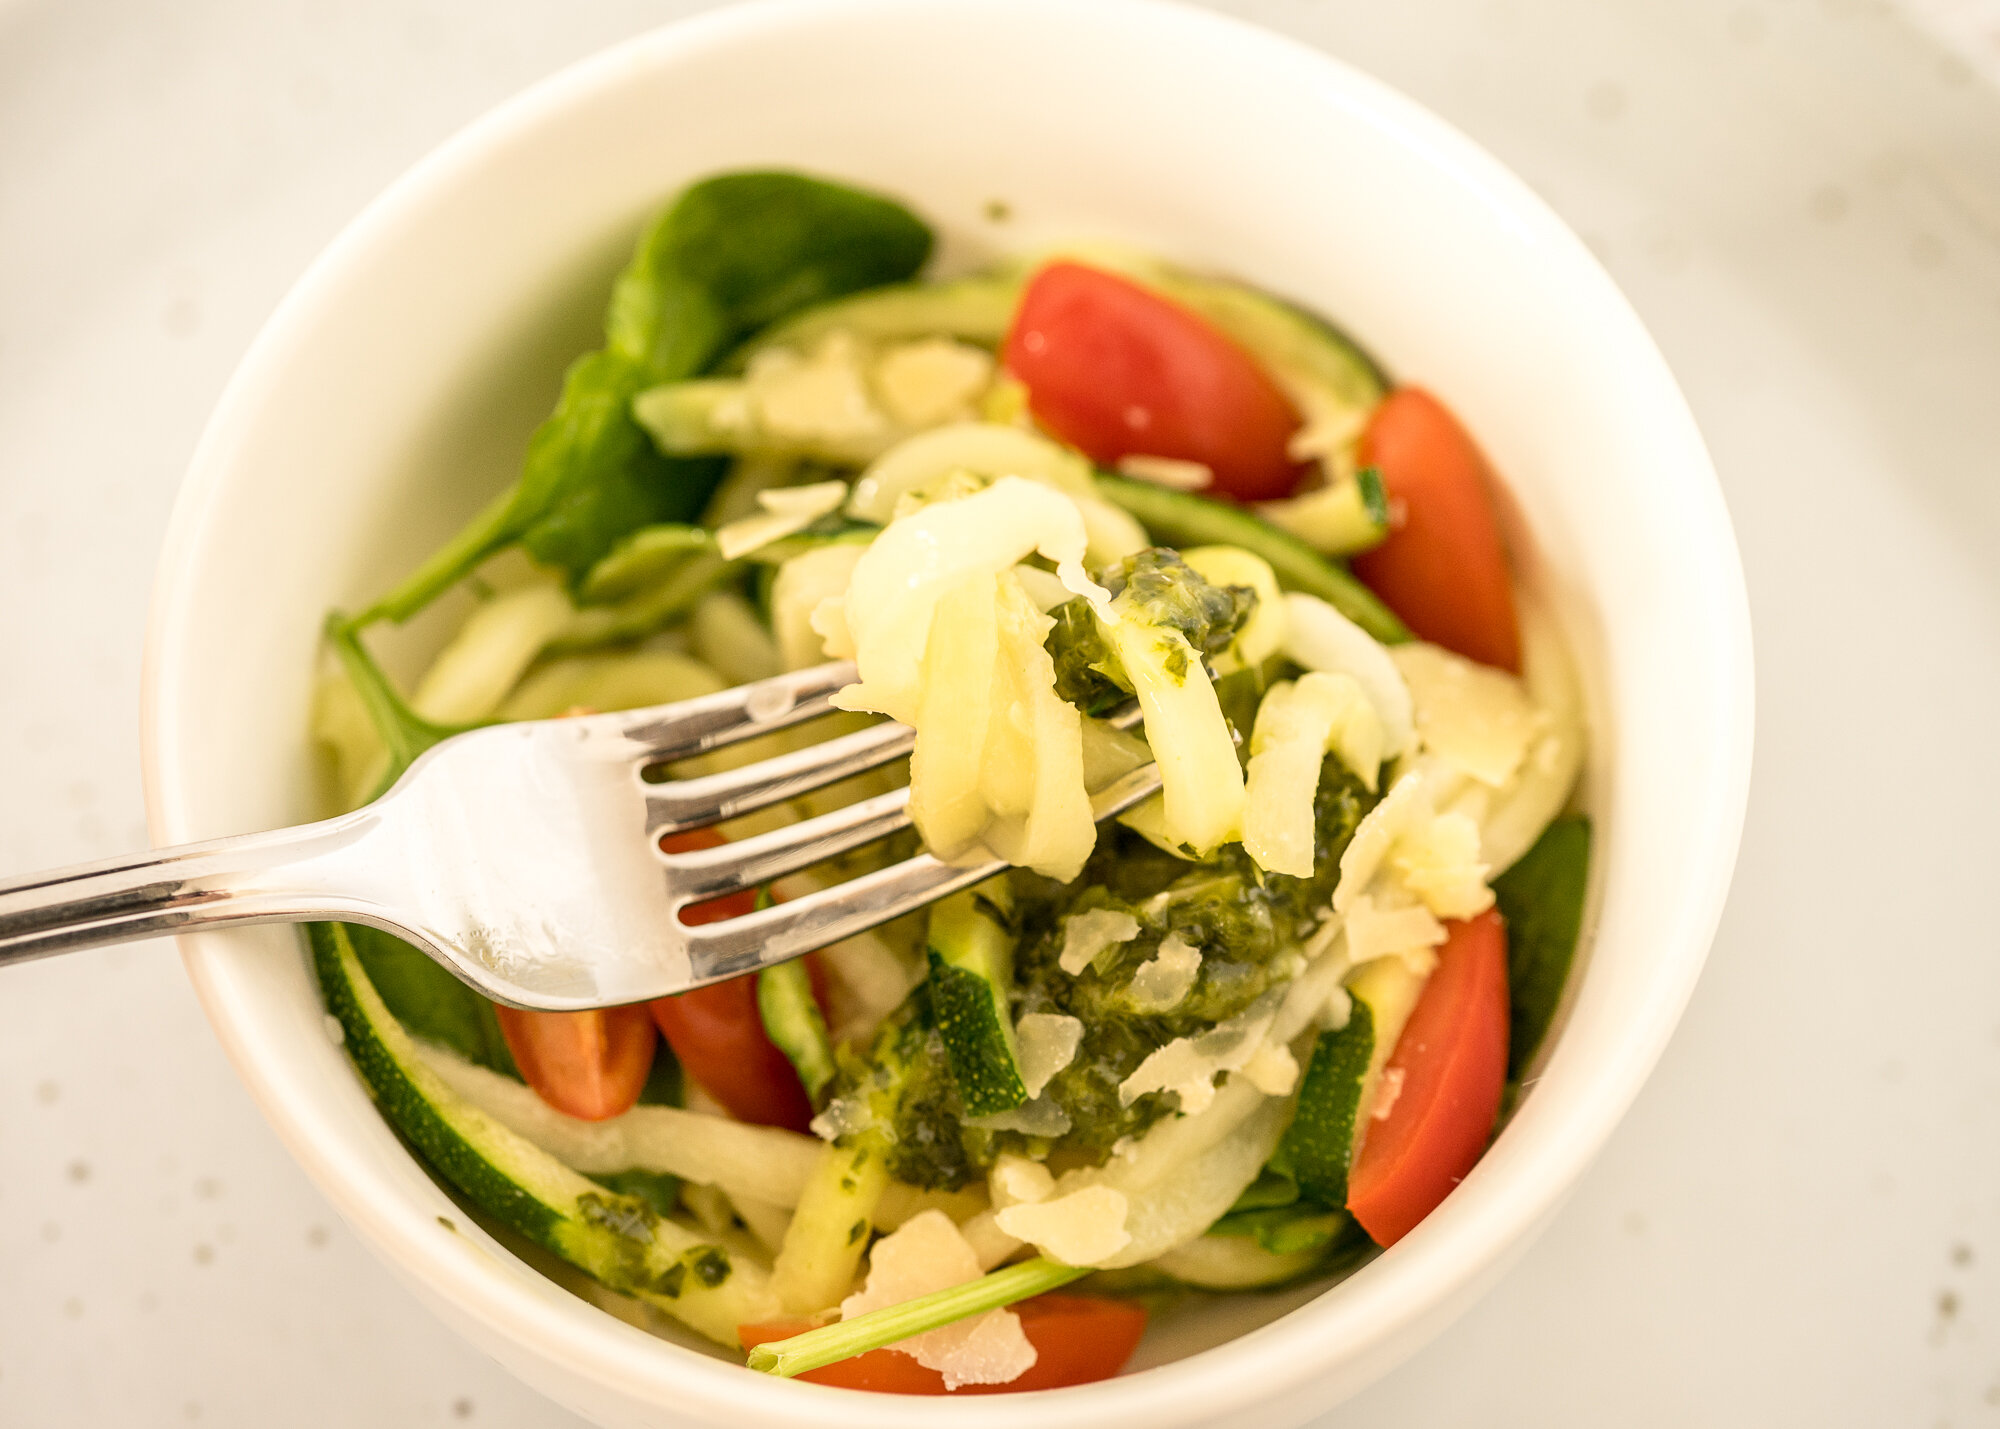 Basil Pesto with Zucchini Noodles